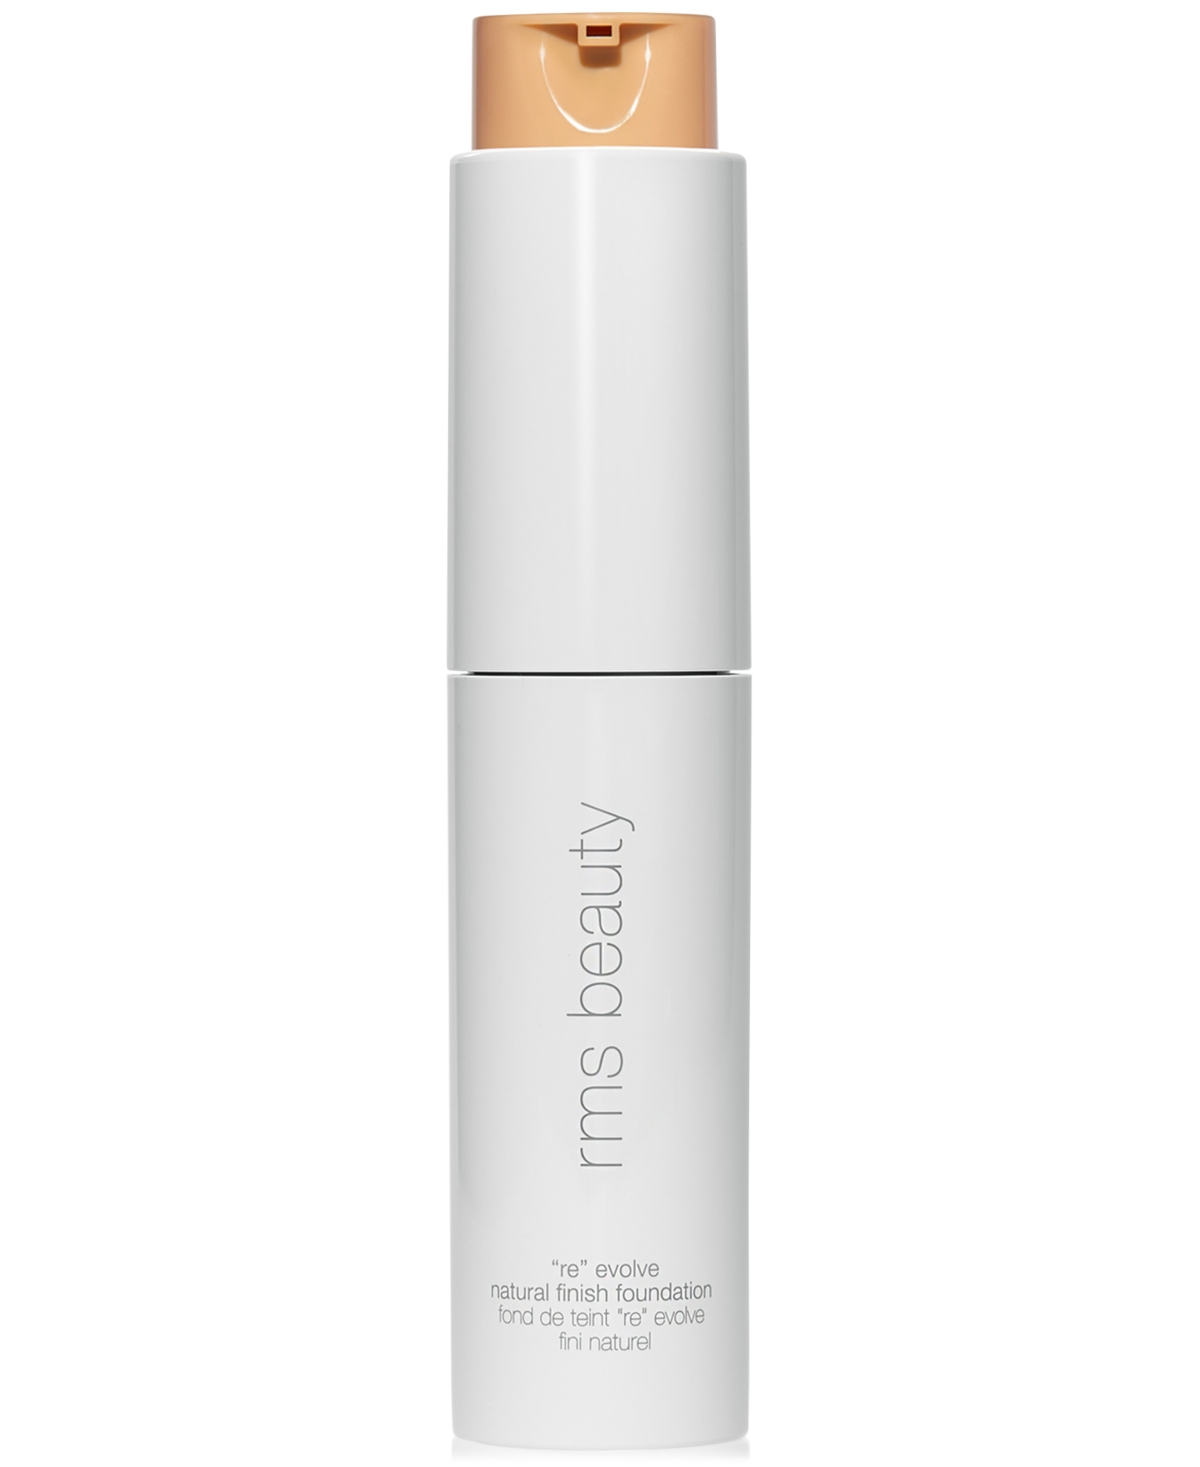 Rms Beauty Reevolve Natural Finish Foundation In Warm Beige